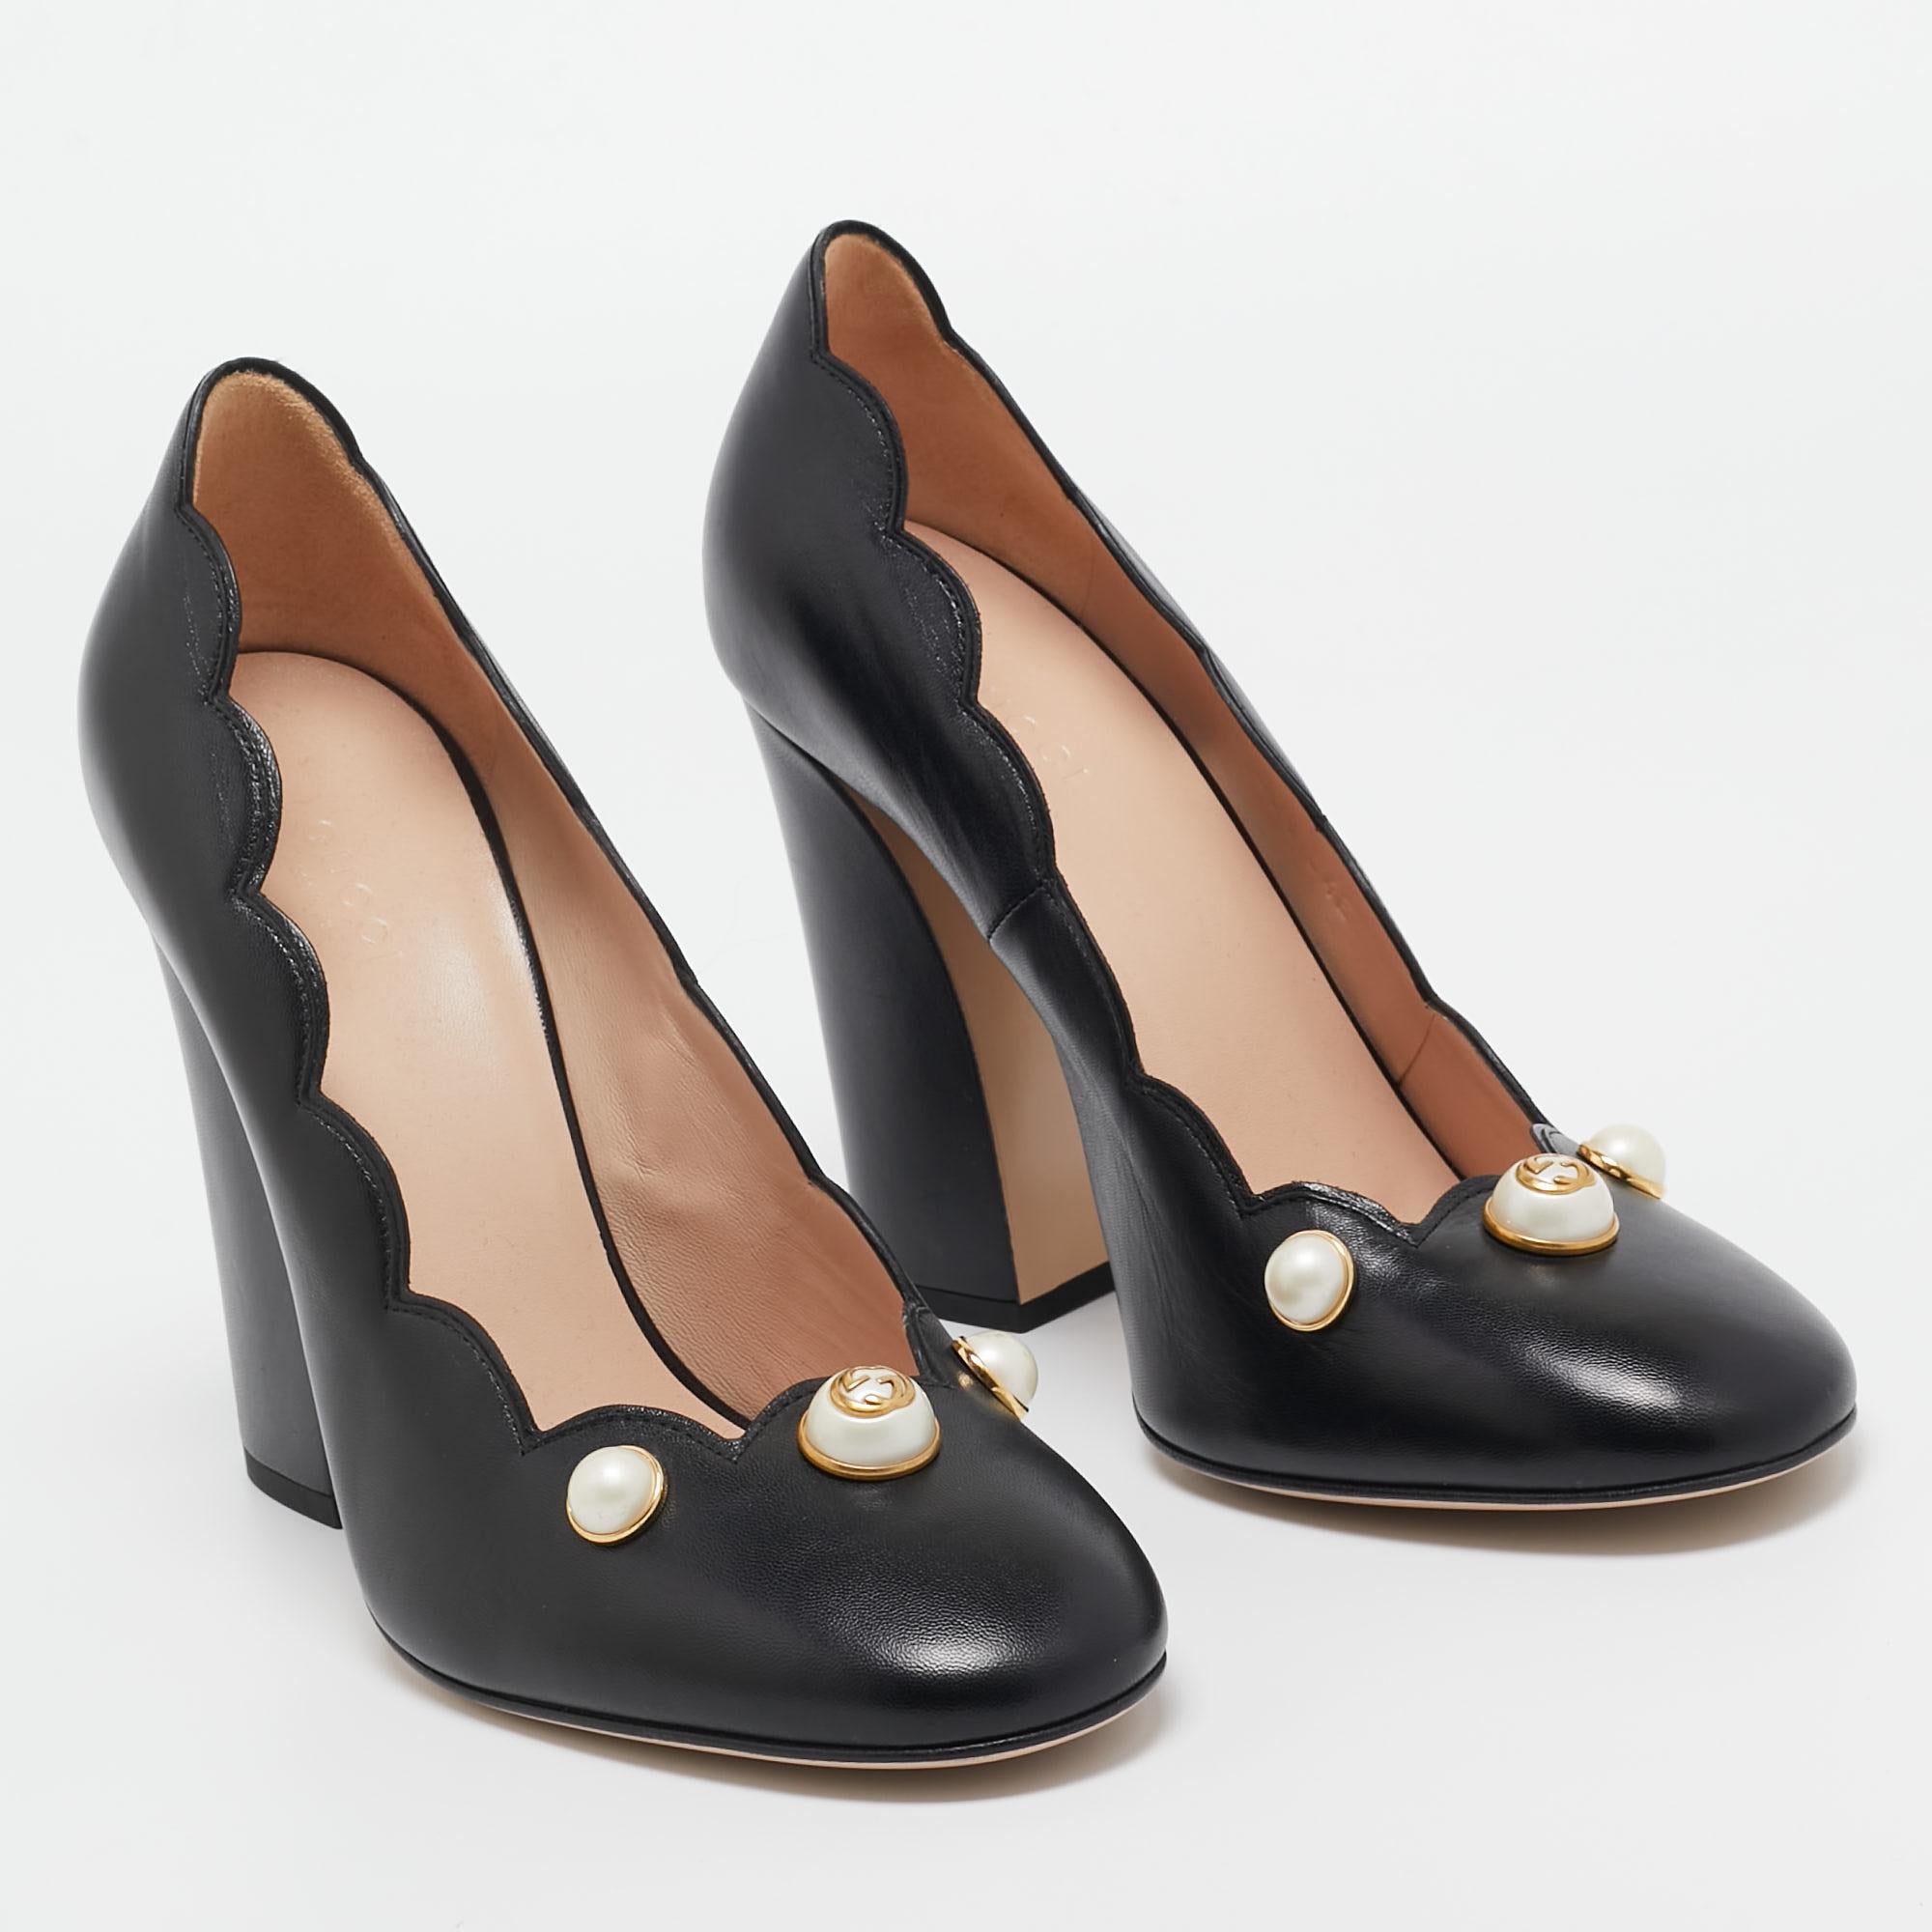 Exhibit an elegant style with this pair of pumps. These designer pumps are crafted from quality materials. They are set on durable soles and block heels.

